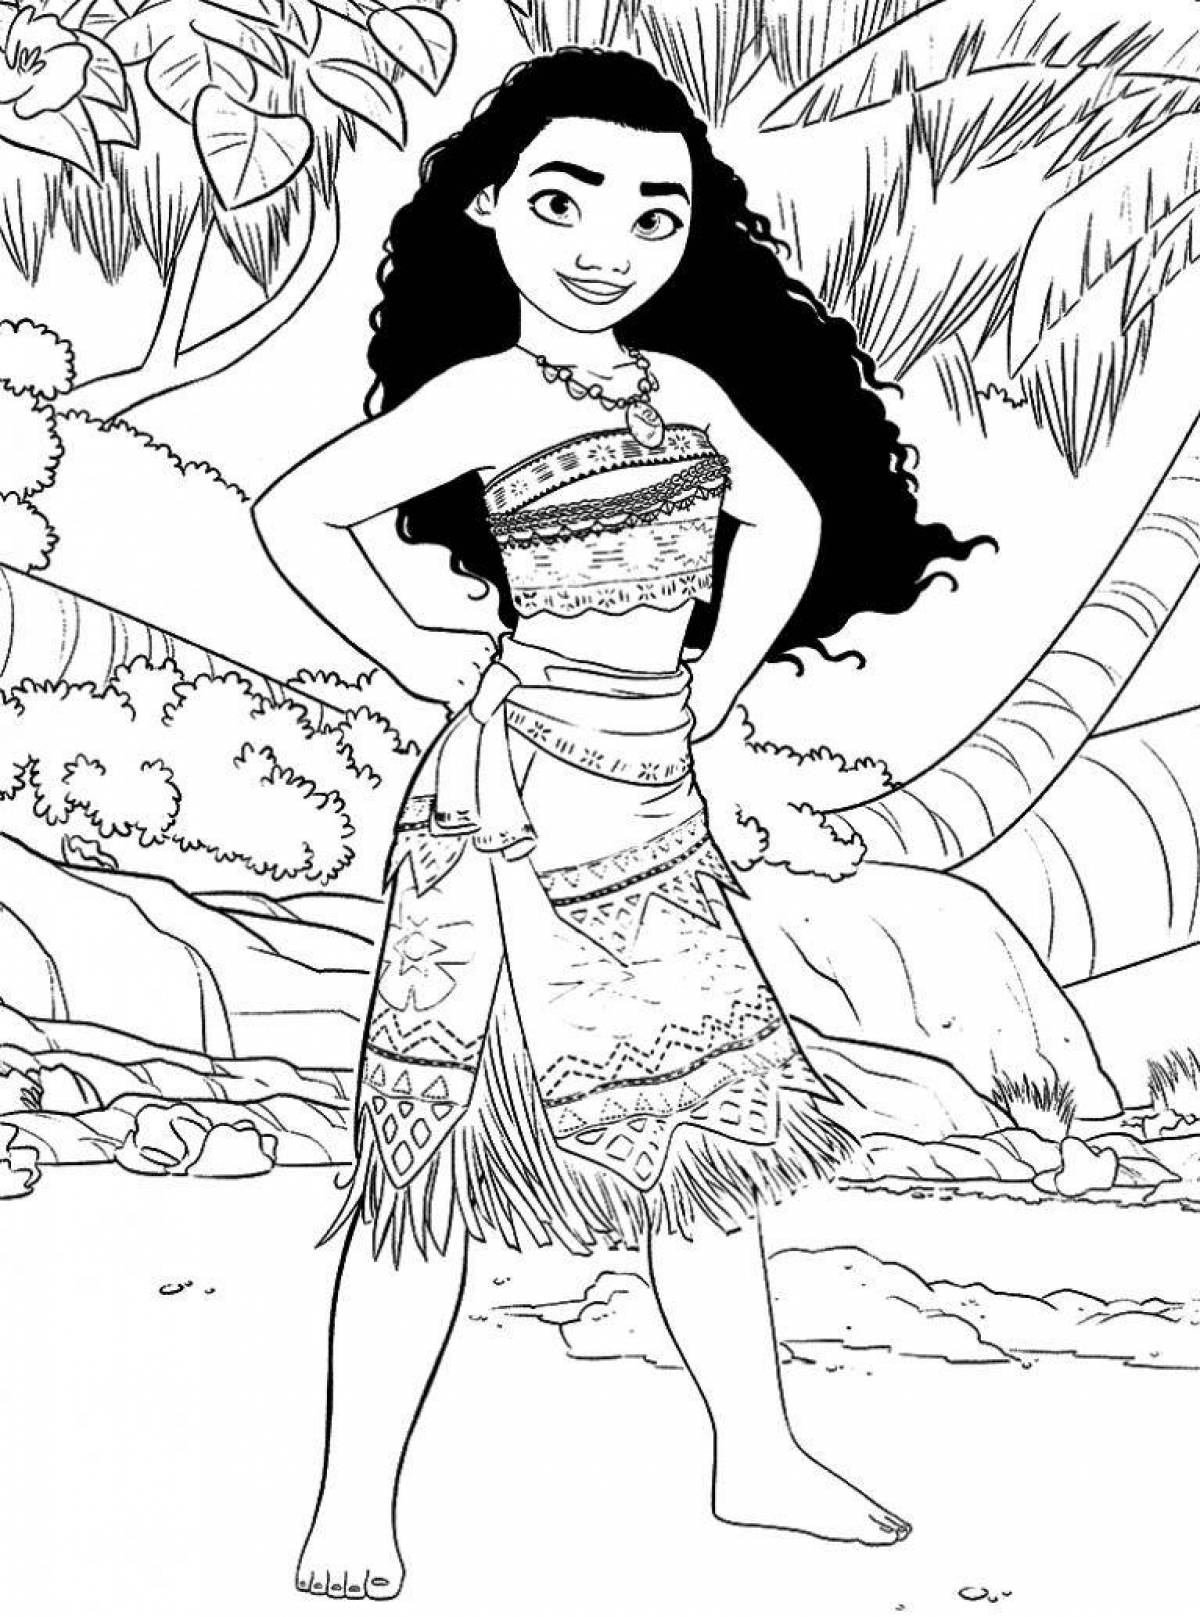 Moana fairy tale coloring book for girls